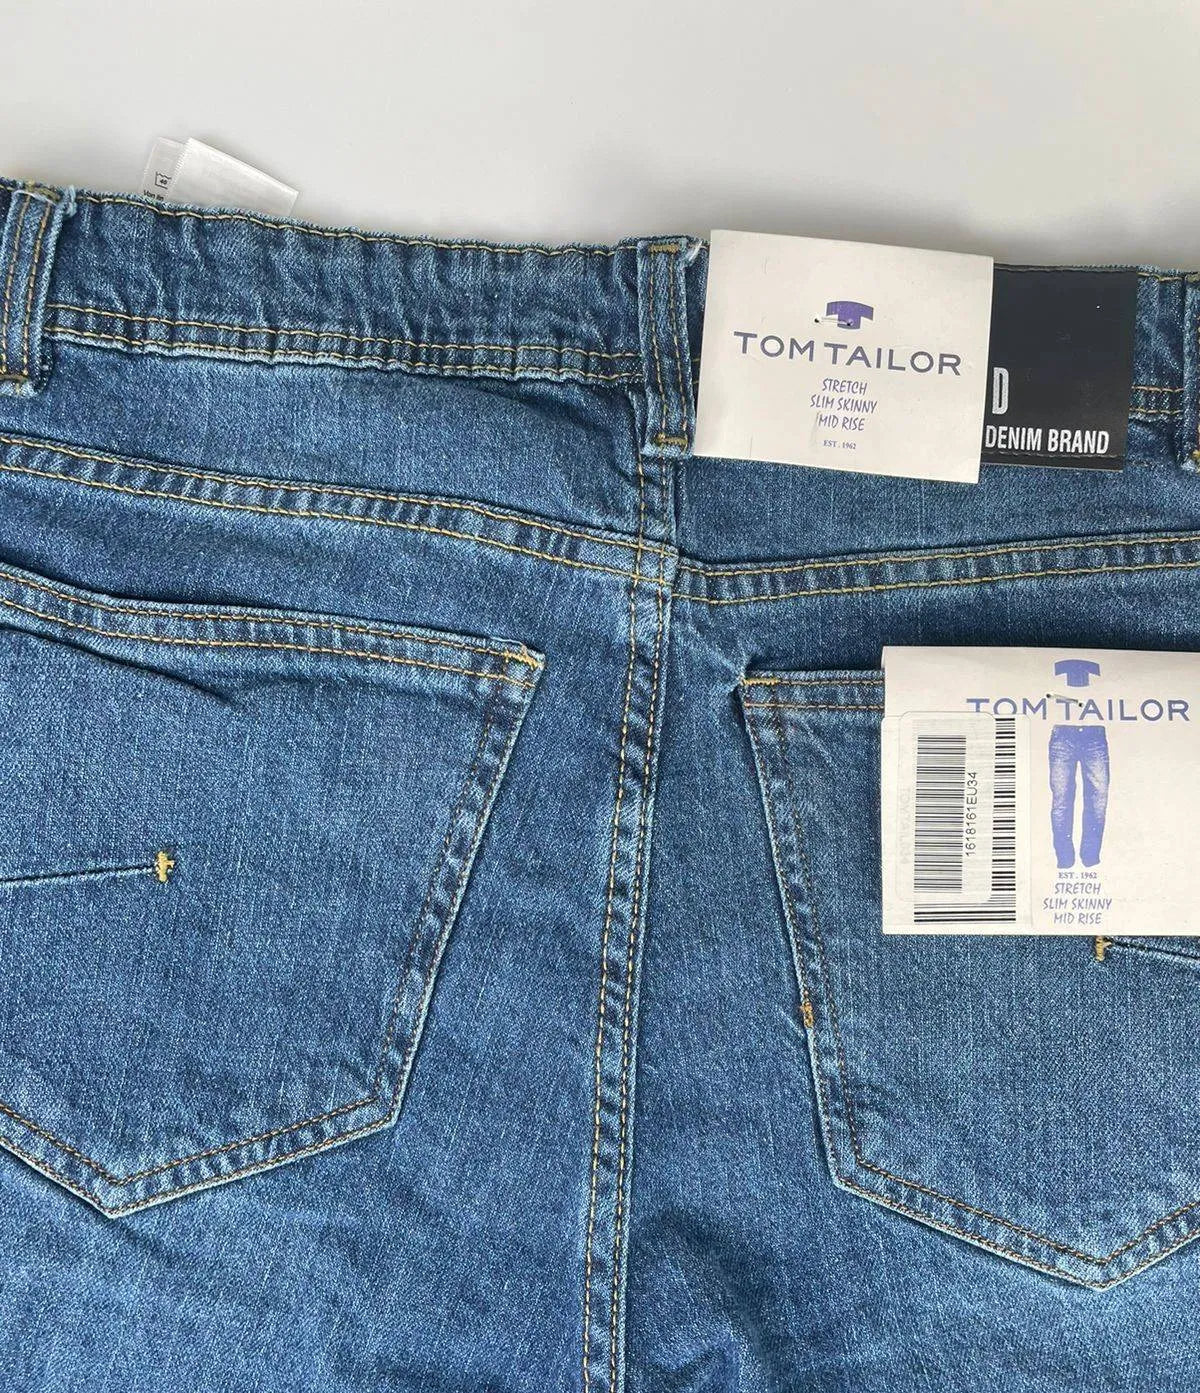 Tom Tailor Skinny Jeans: Elevate your style with flawless fit & crisp blue wash. (mention size if relevant)Designed to hug your legs comfortably for a sharp silhouette.Tom Tailor, slim skinny, blue, comfortable, stylish, everyday wear.